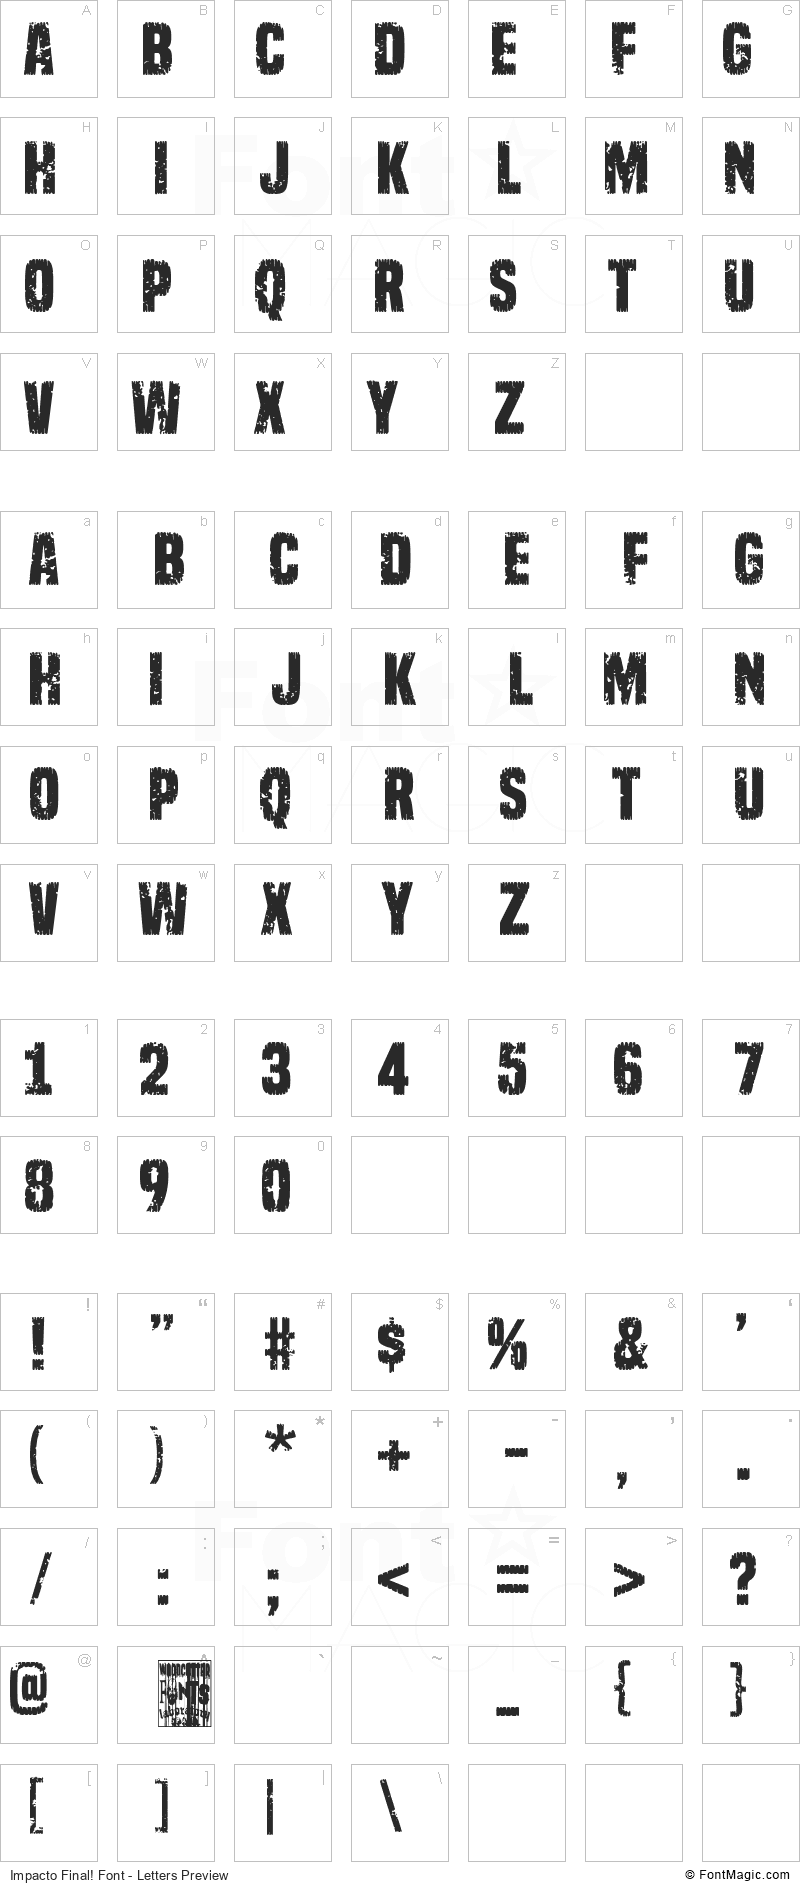 Impacto Final! Font - All Latters Preview Chart